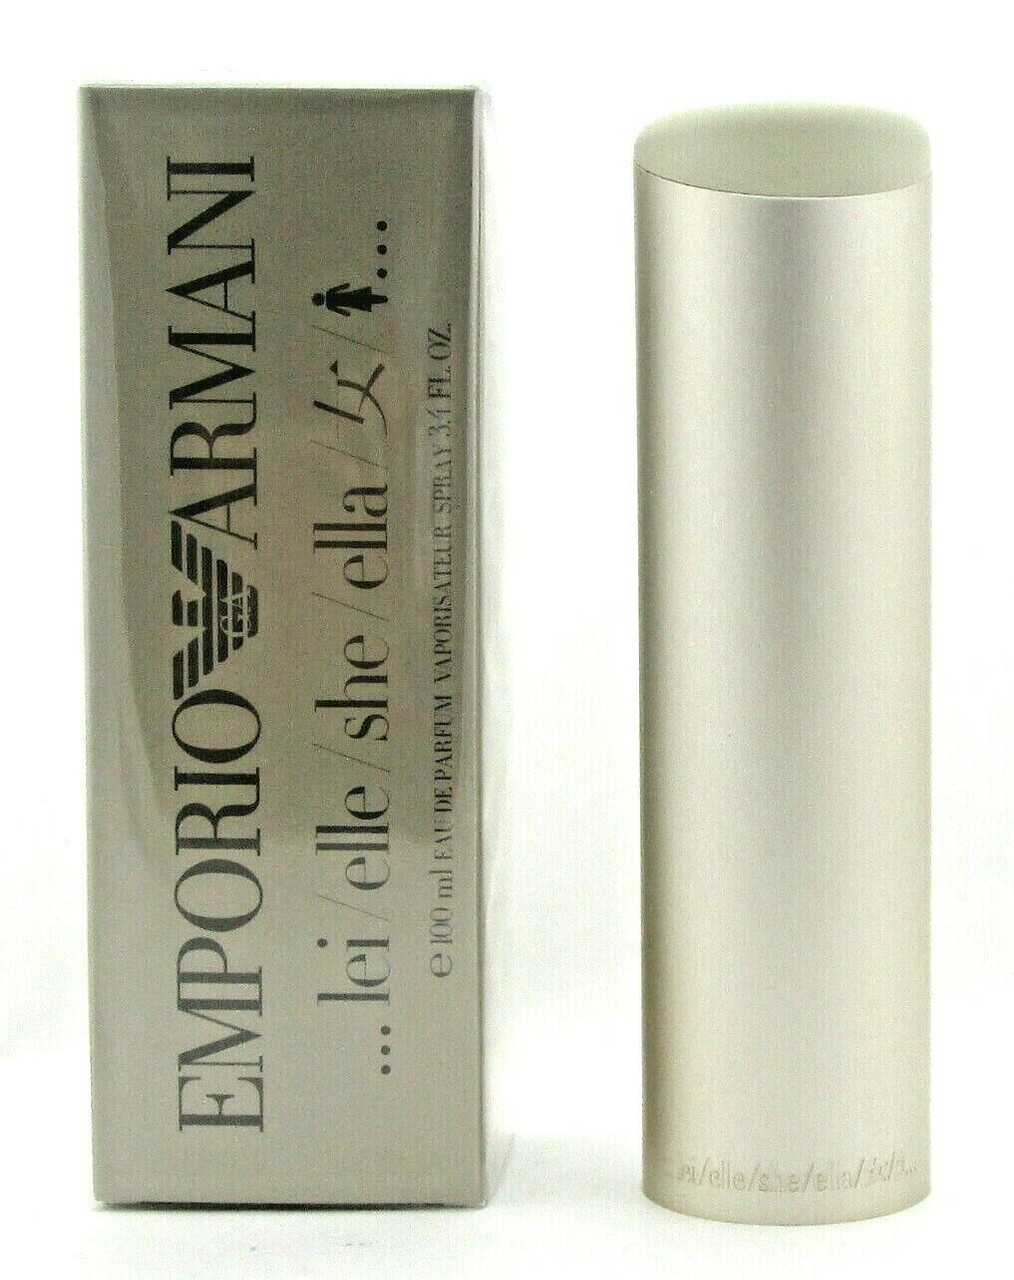 Emporio Armani SHE by Giorgio Armani 3.4 oz. EDP Spray for Women. New  Sealed Box - eDiscountPerfumes.com -FREE SHIPPING* From An Independent  Seller of 100% Authentic Brands Since 2006 (*standard shipping to 48 states)